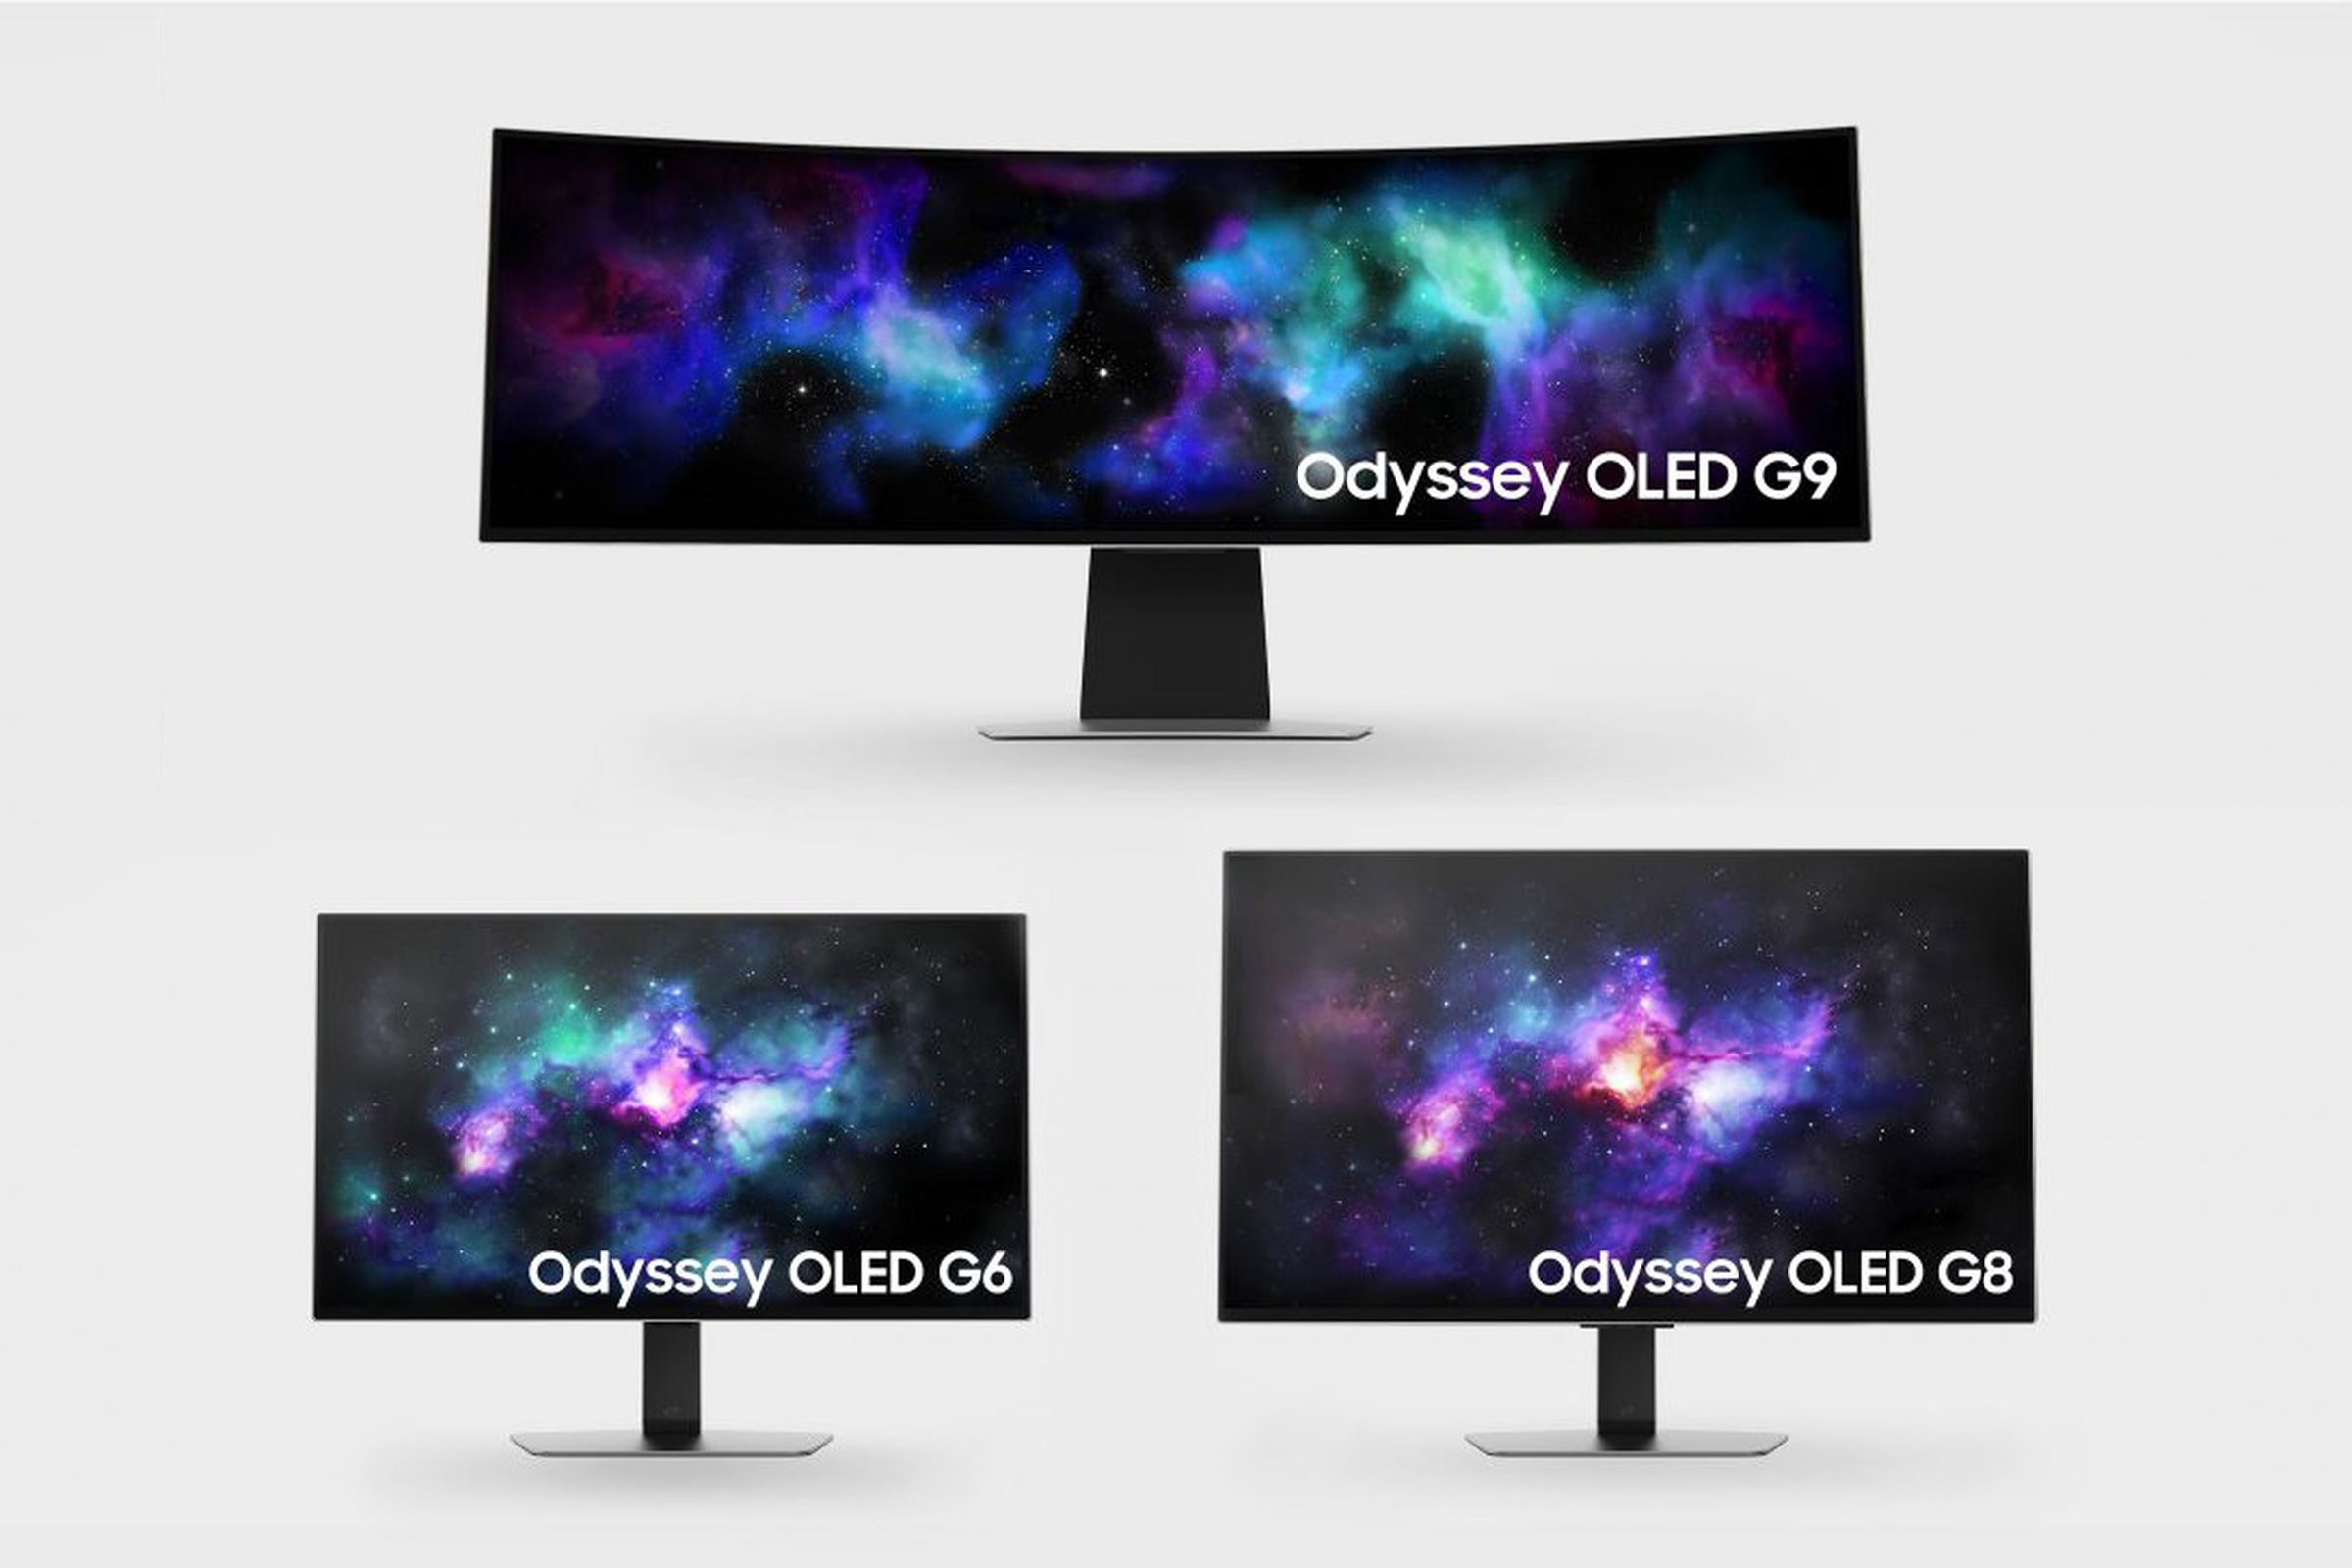 The curved Odyssey OLED G9 above the flat OLED G6 and G8. 